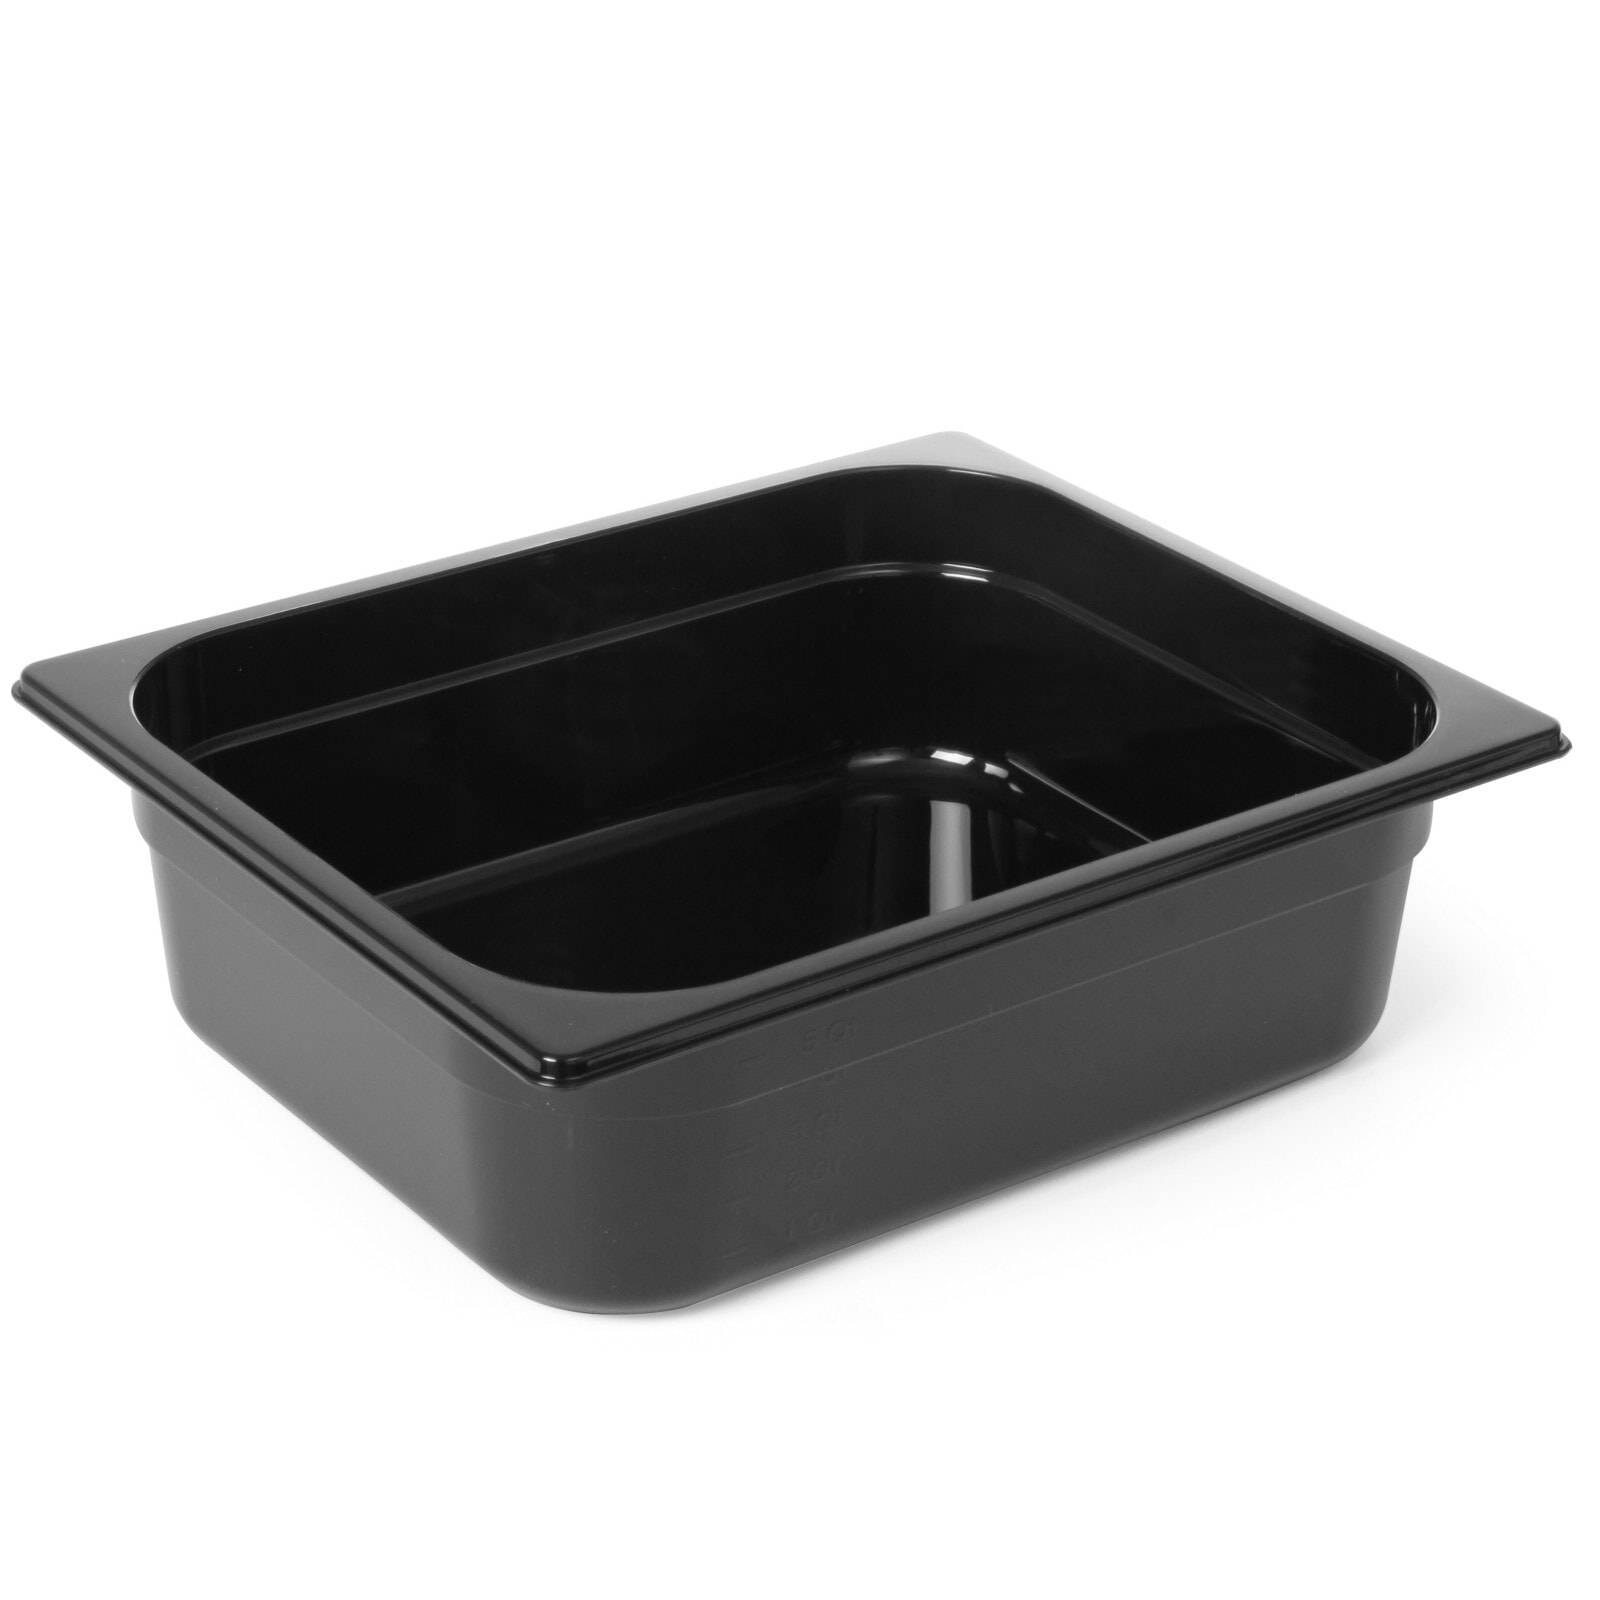 Container made of black polycarbonate GN 1/2, height 65 mm - Hendi 862438